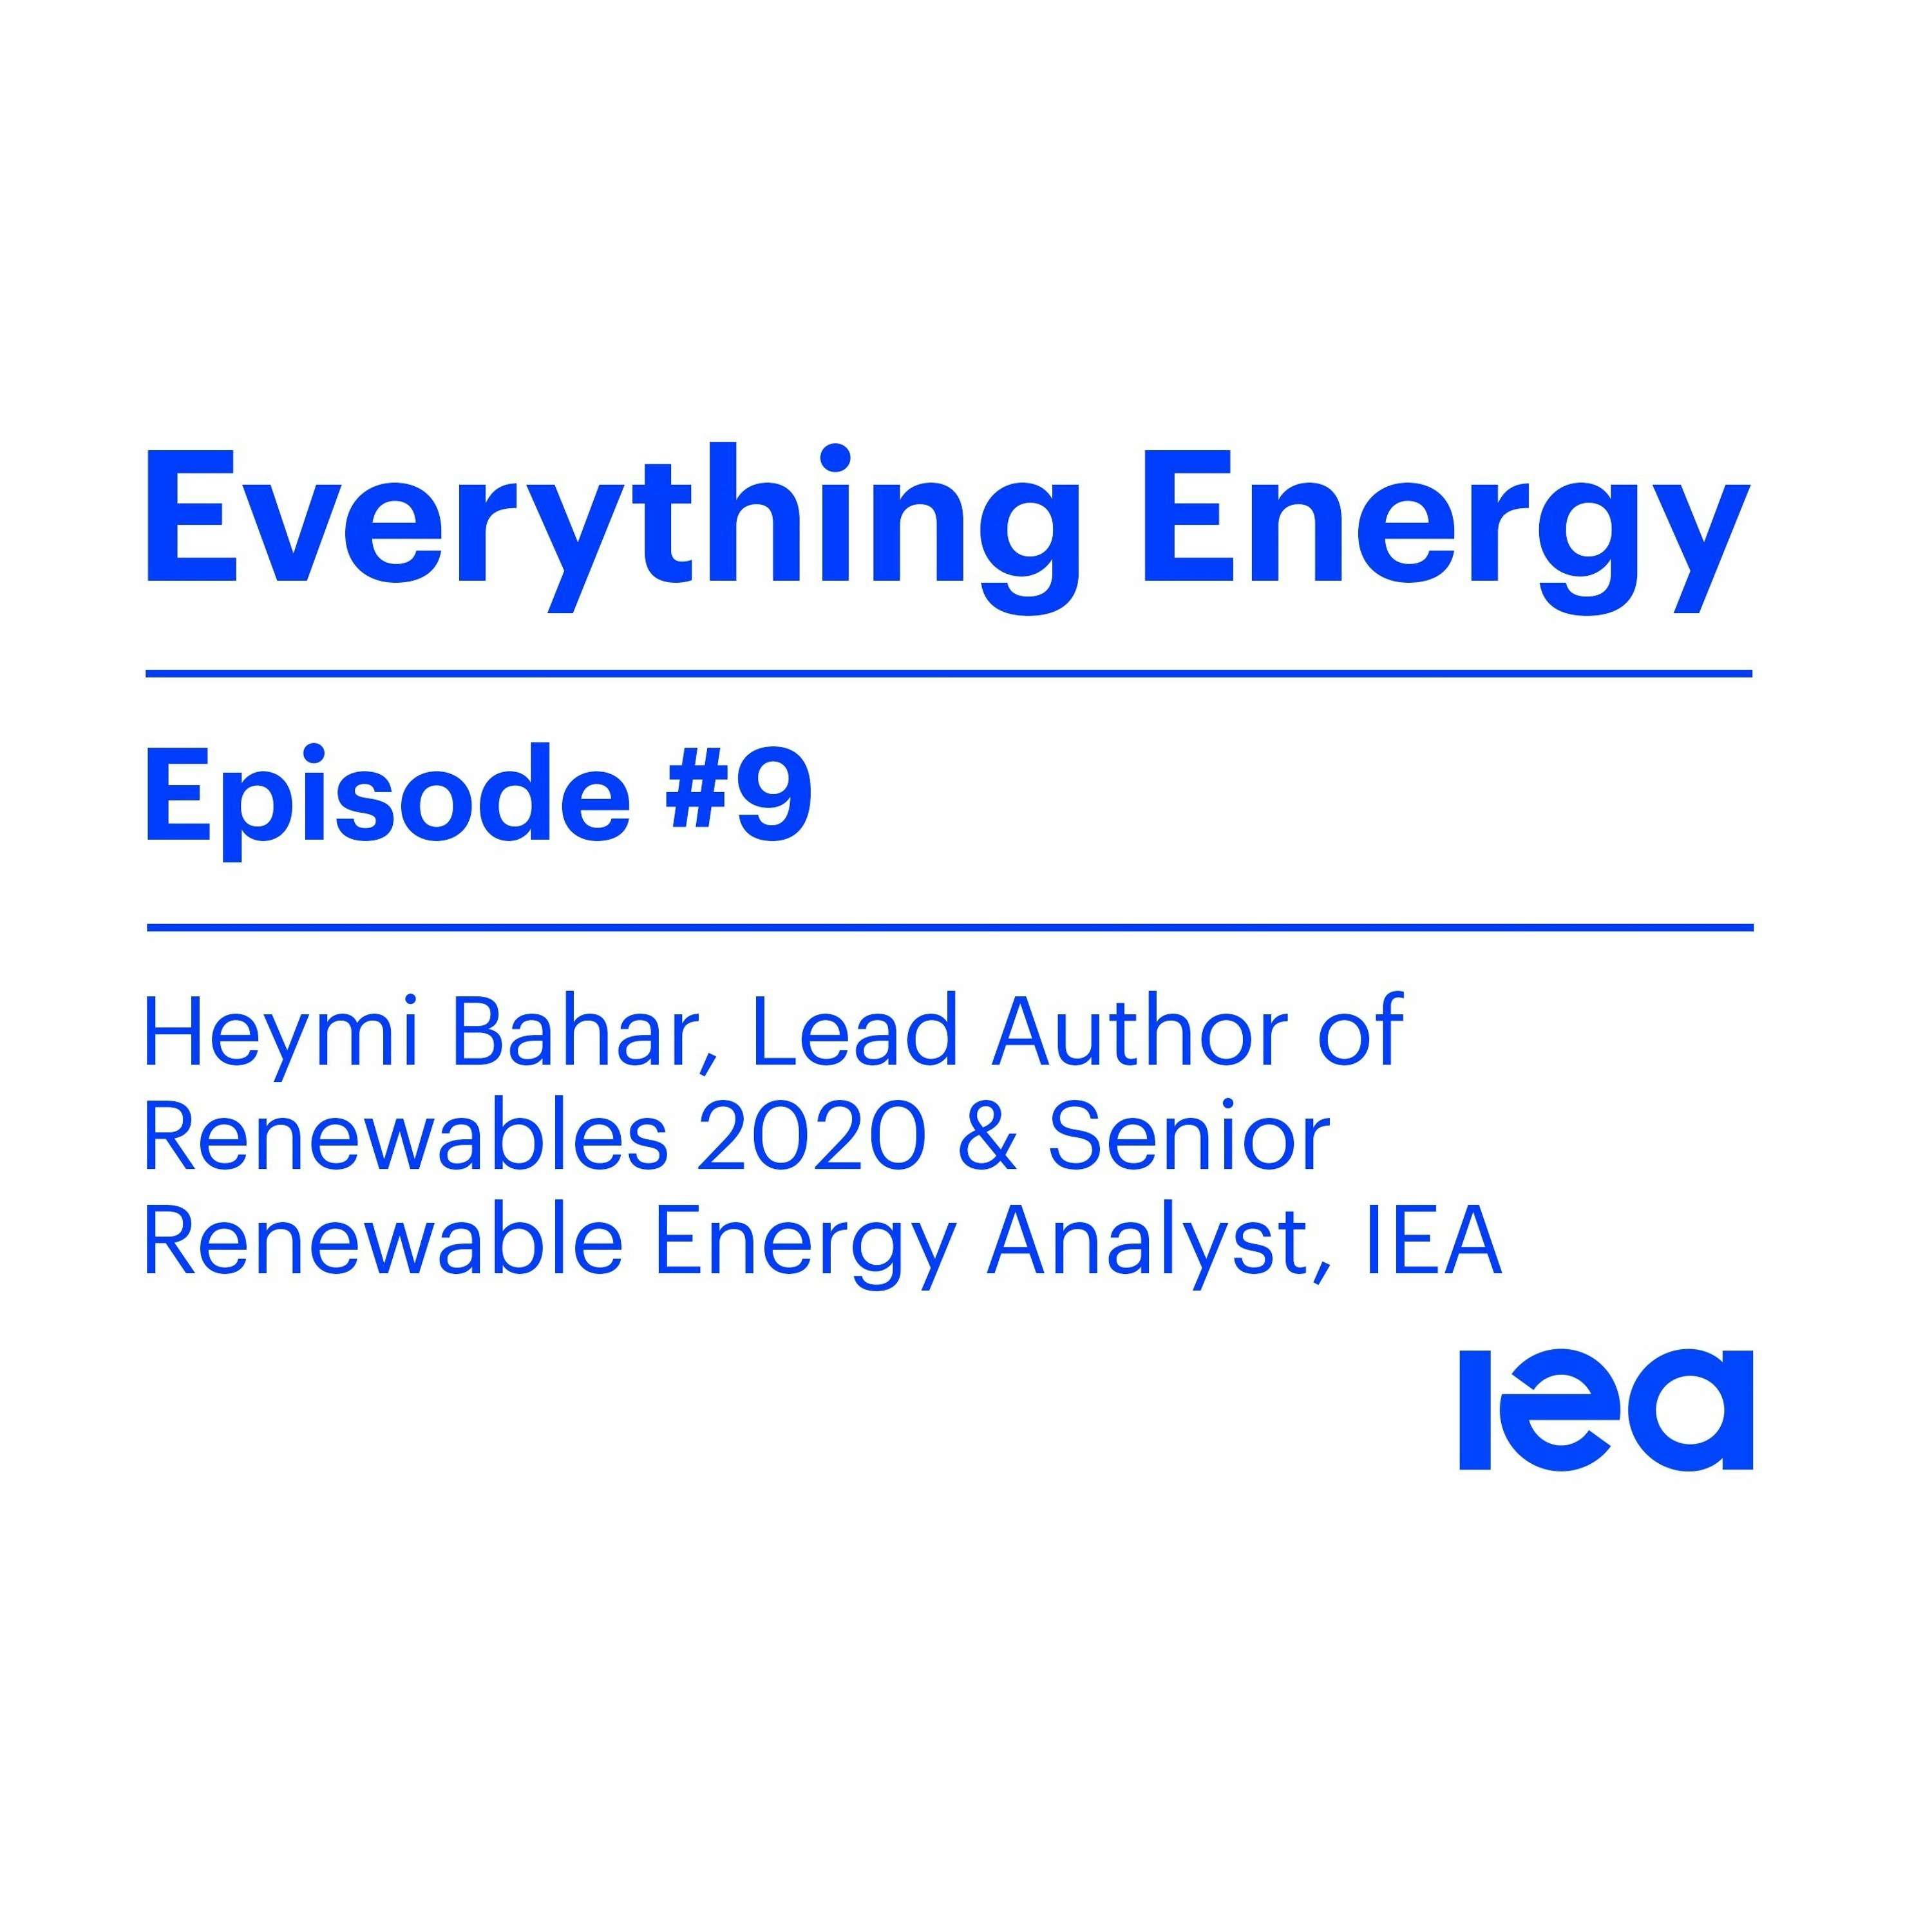 Episode 9: The resilience of renewables in the face of the Covid-19 crisis